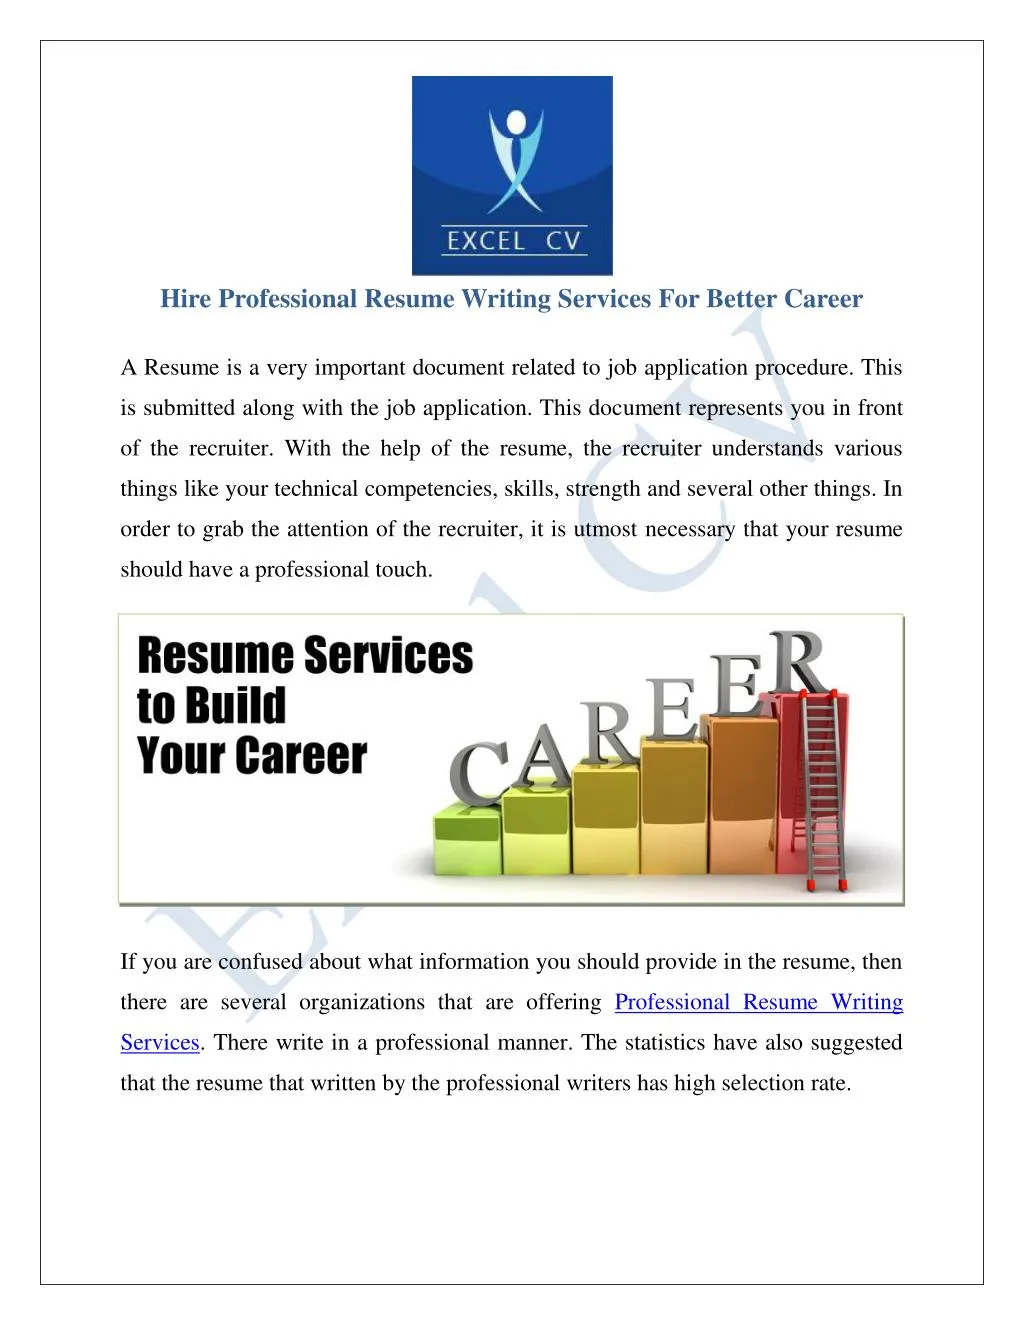 Resume writing services online india